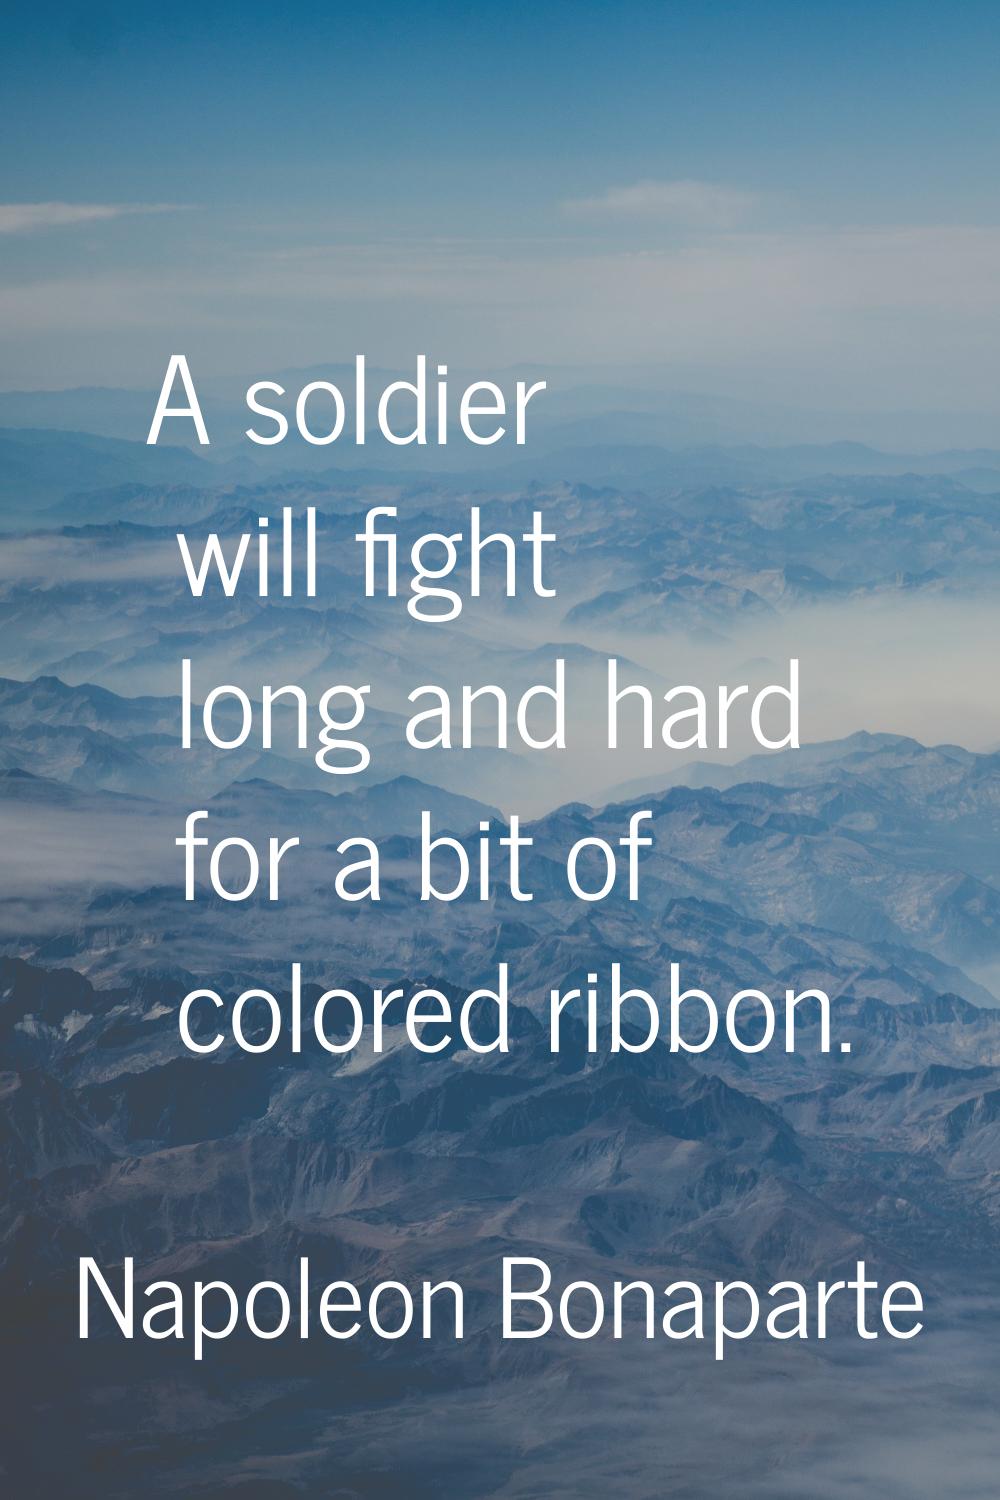 A soldier will fight long and hard for a bit of colored ribbon.